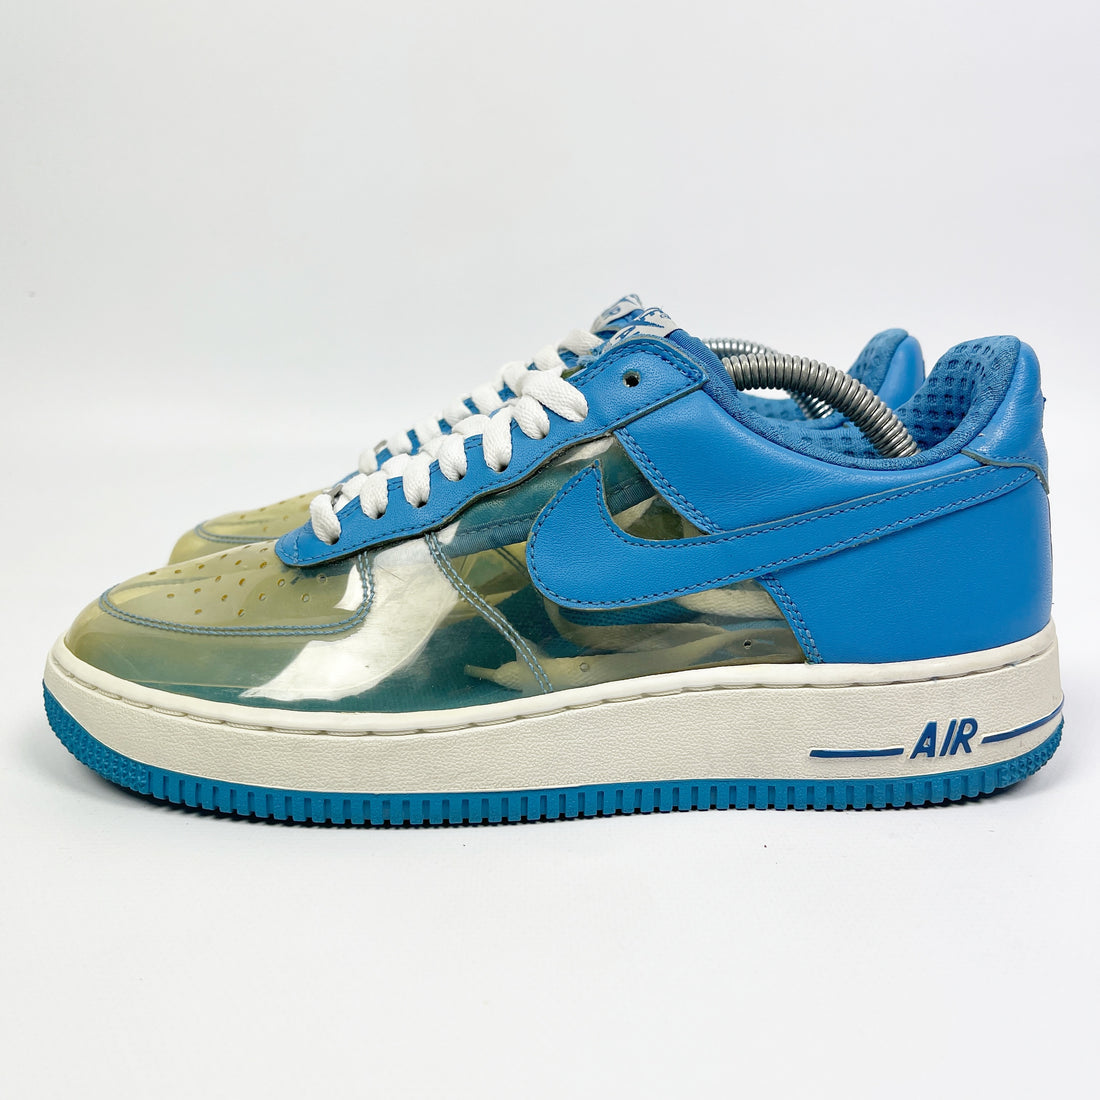 Nike Air Force 1 Low Fantastic 4 Invisible Woman 2006 - Vintagetts